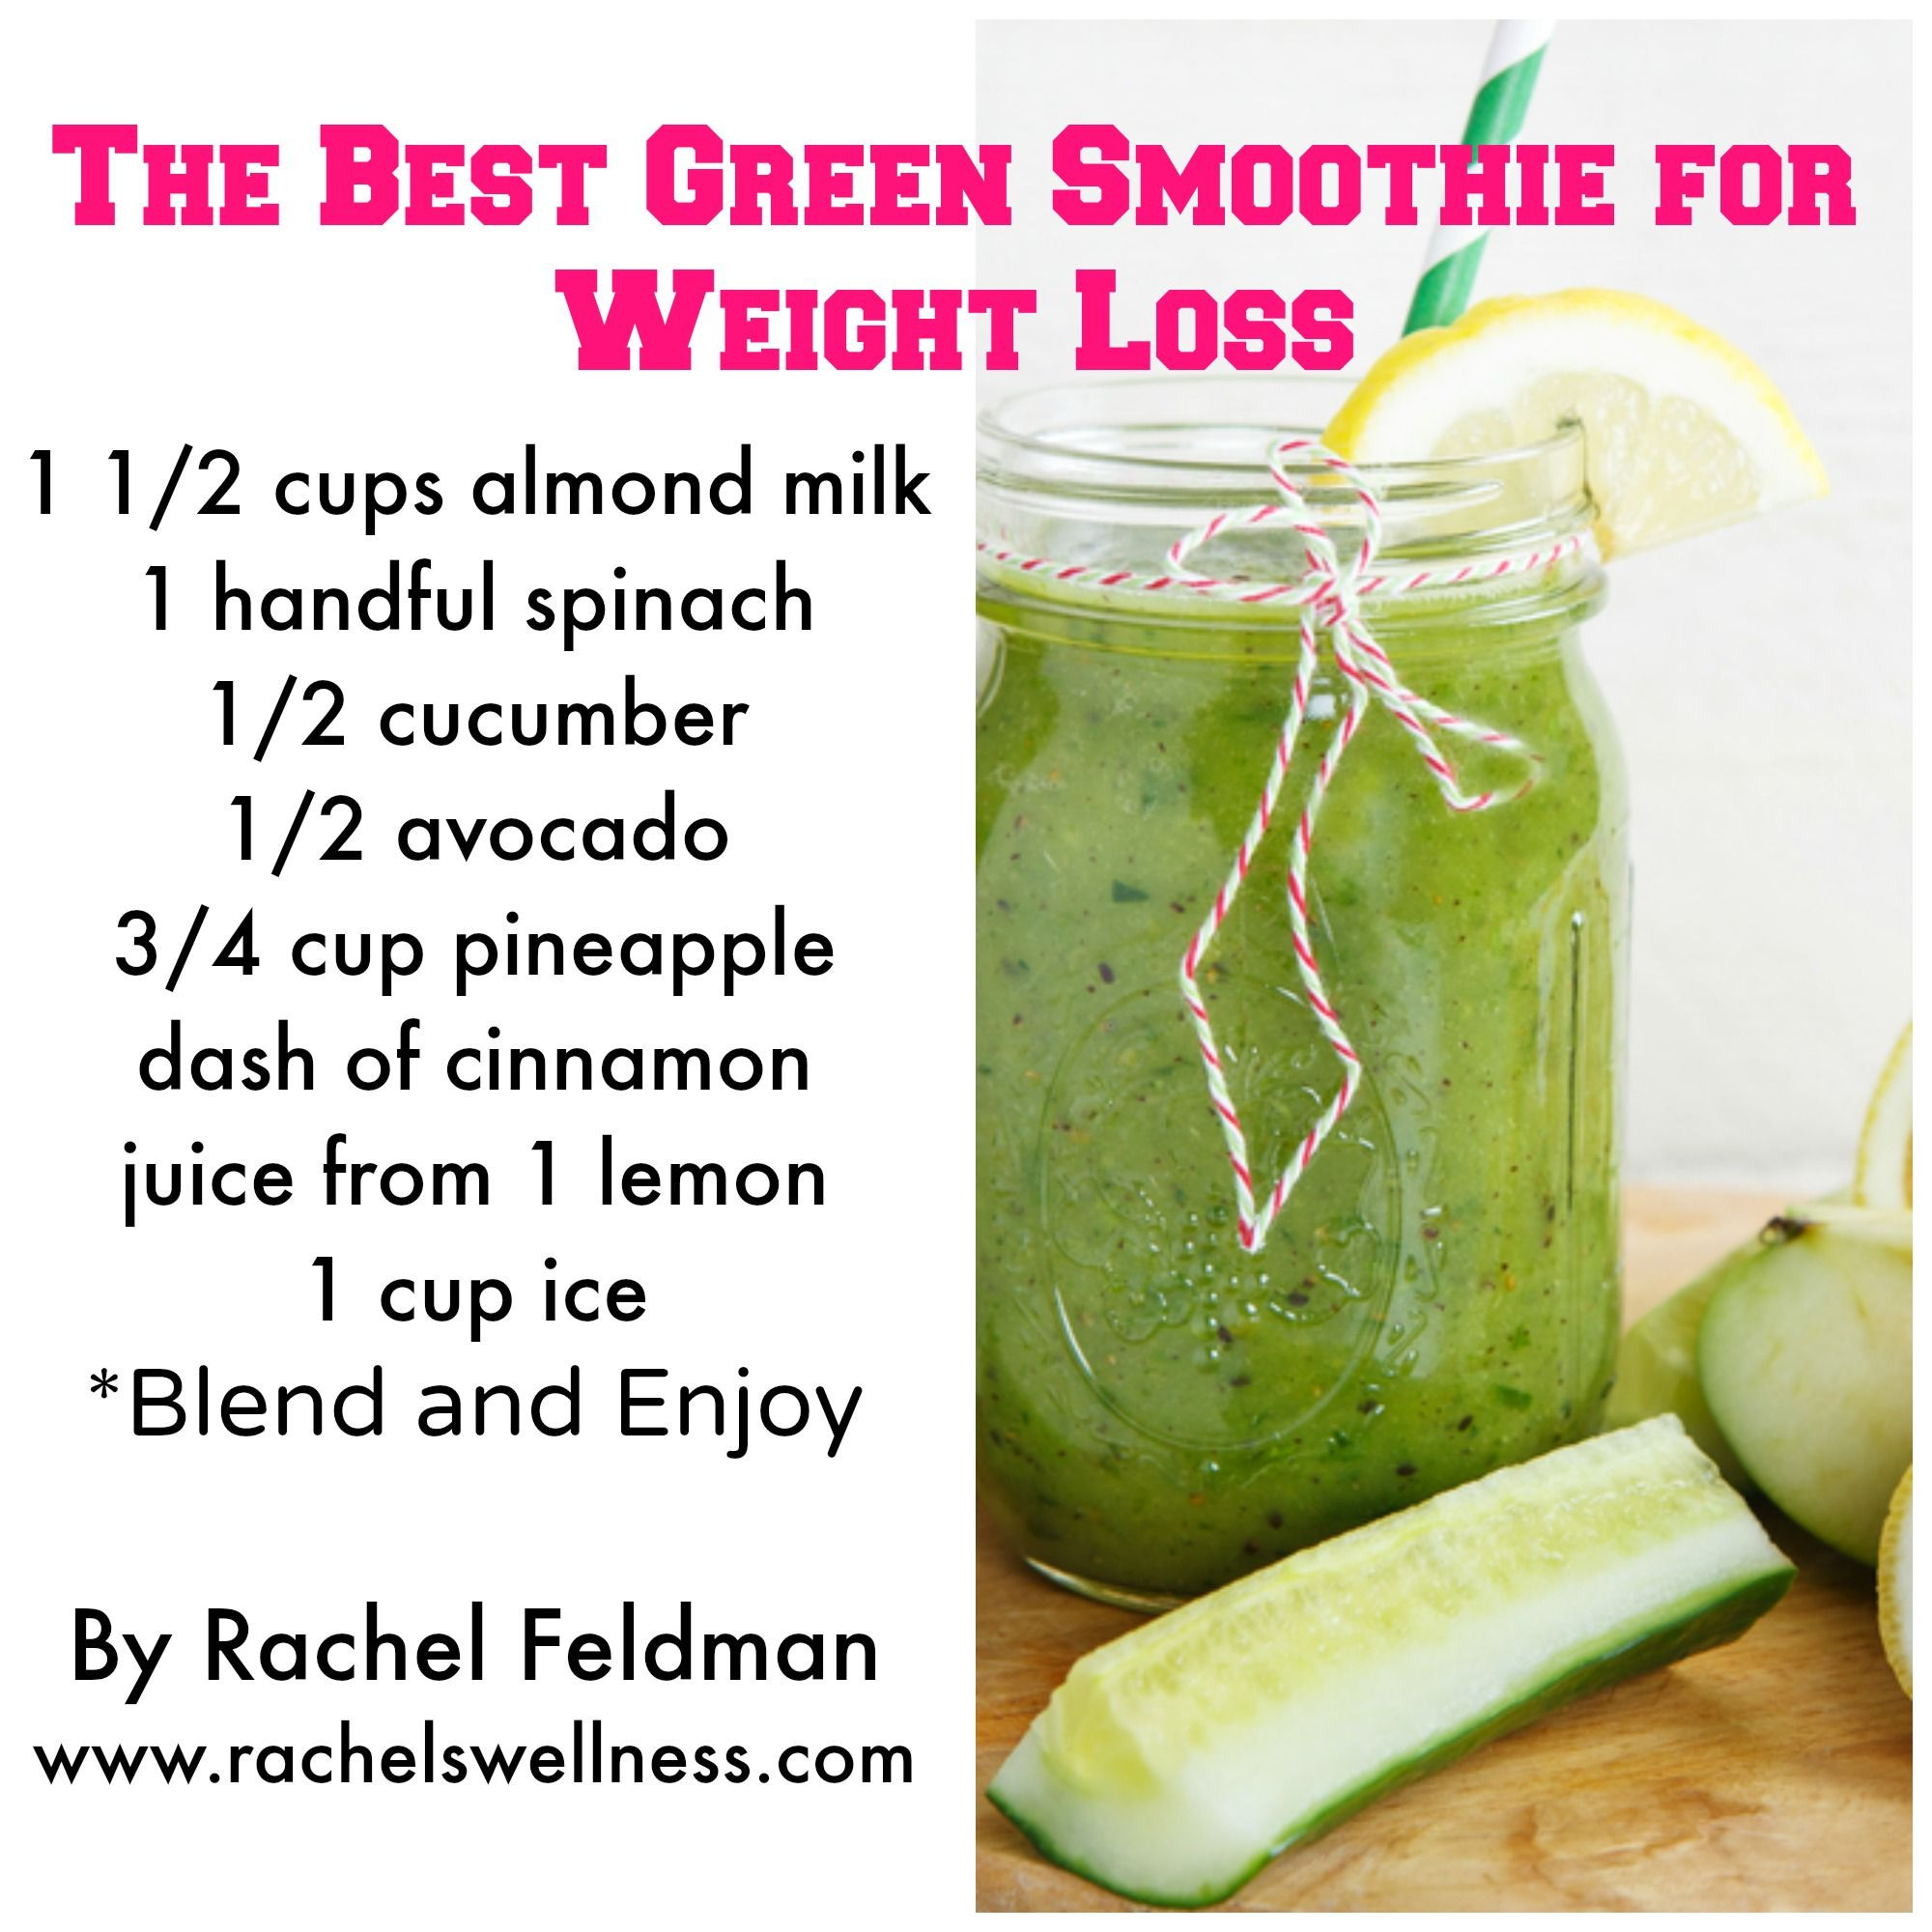 Healthy Homemade Smoothies For Weight Loss
 smoothie recipes for weight loss